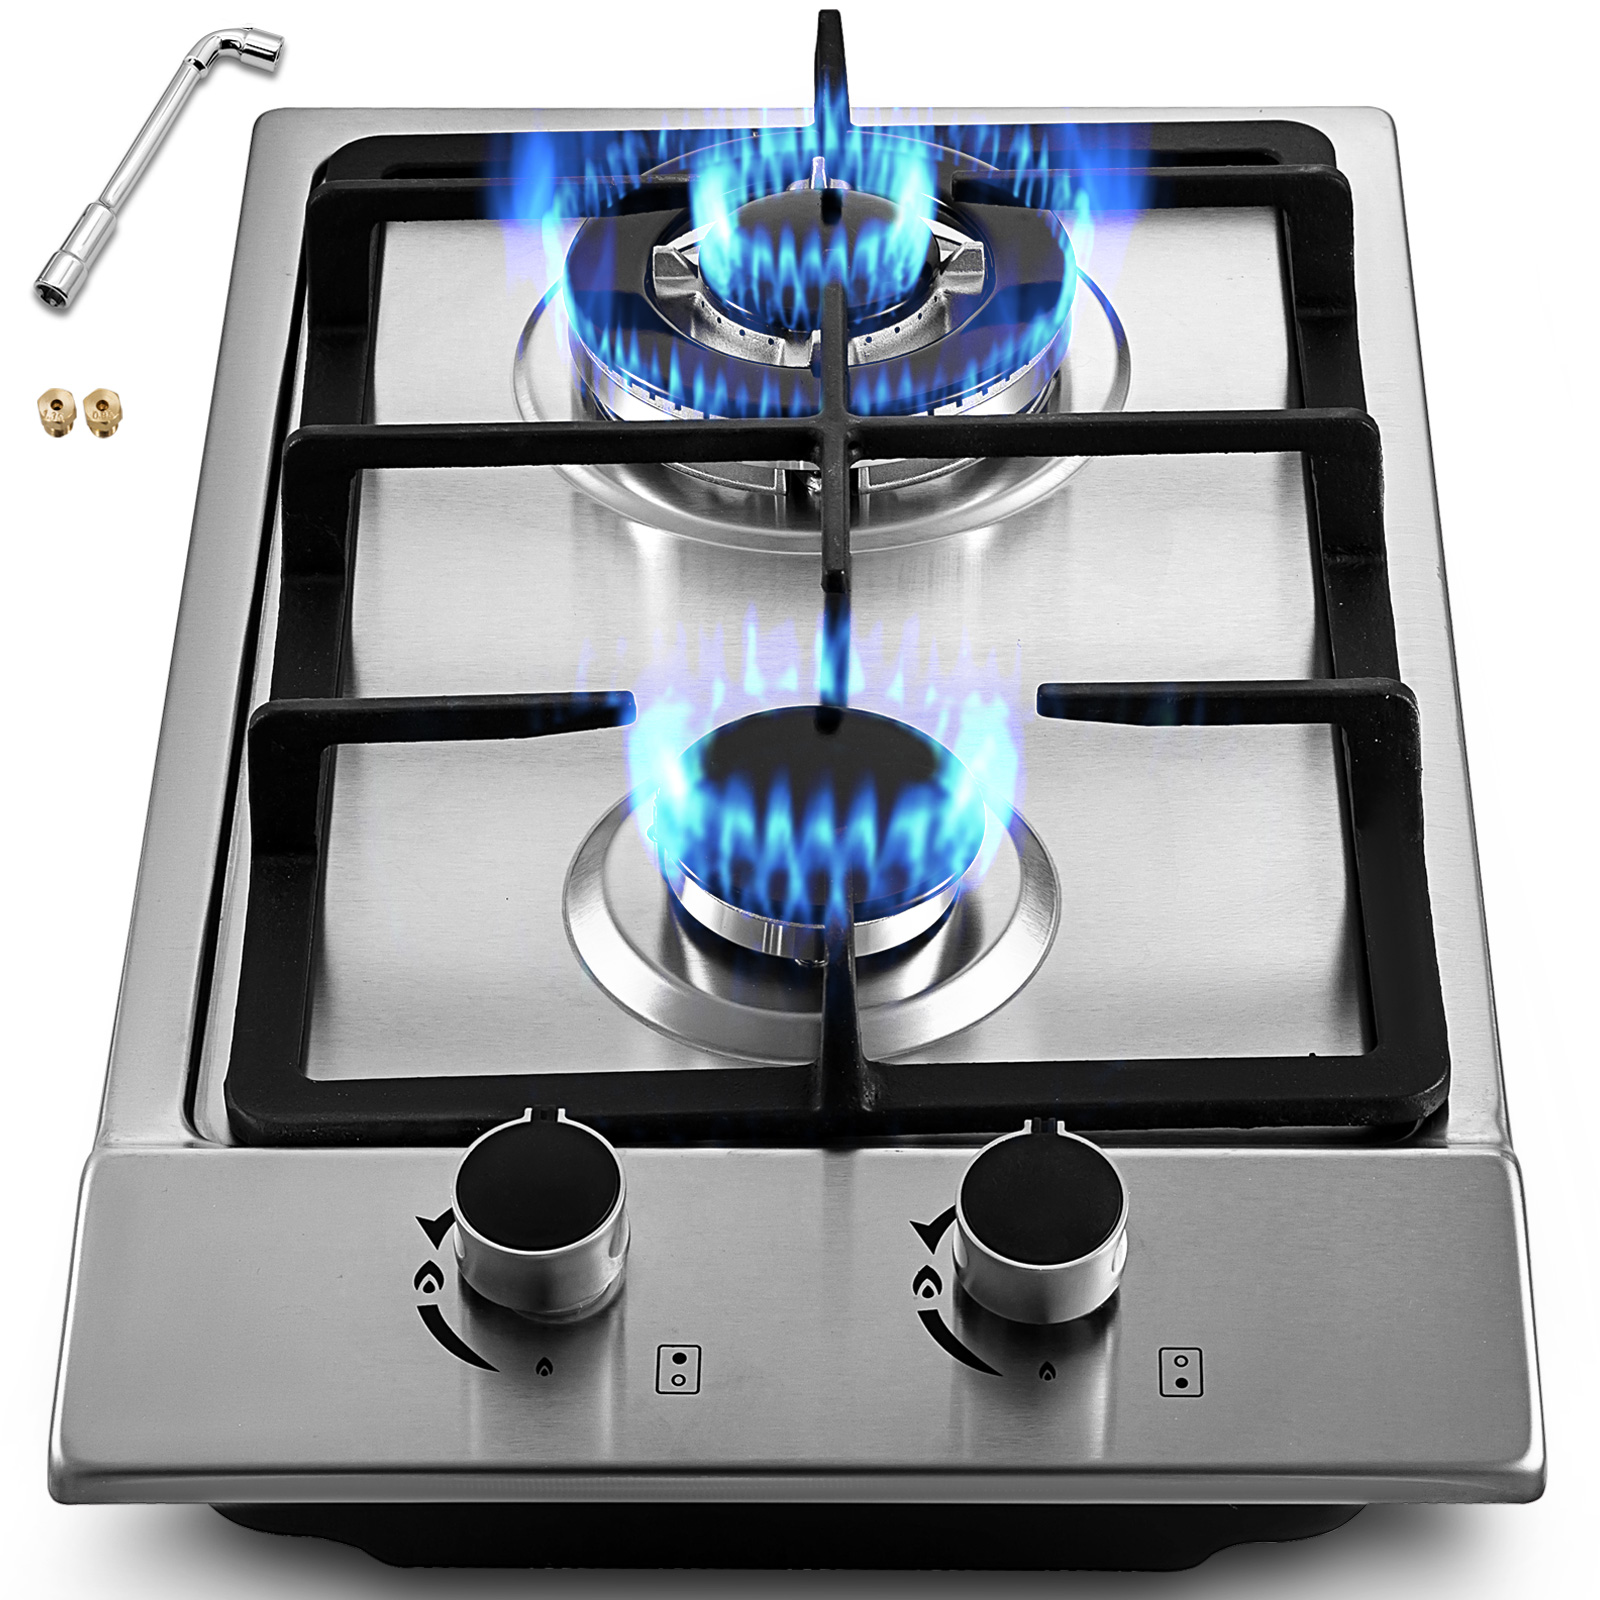 Creatice Double Burner Electric Stove for Simple Design